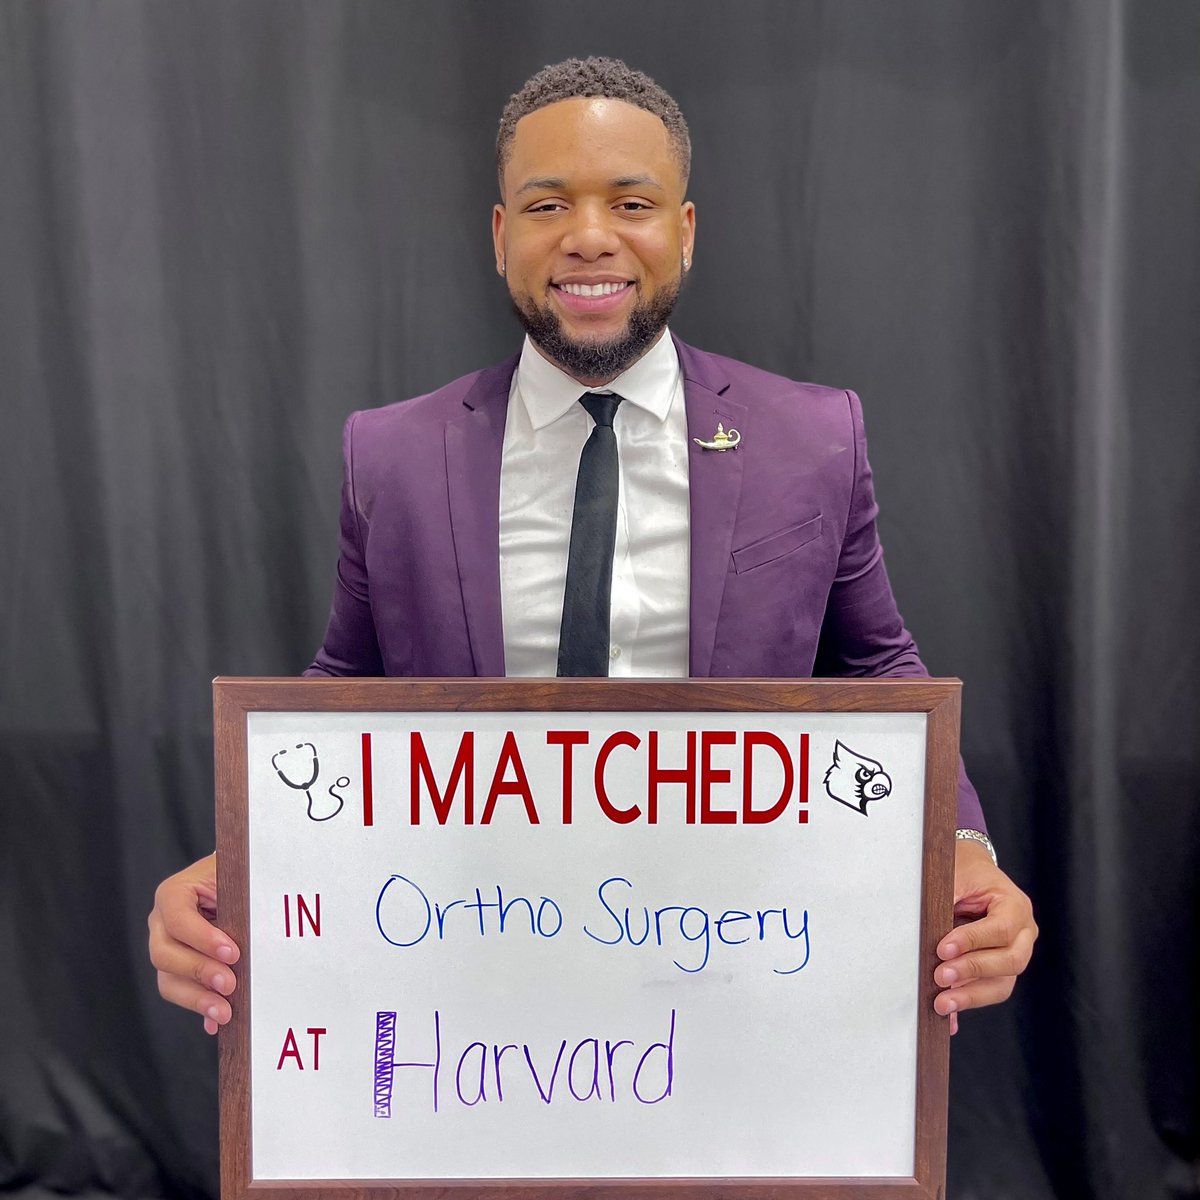 I matched at Harvard, my #1 choice for Orthopaedic Surgery residency! 

Boston, I’ll see you soon! @harvardortho 

#MatchDay2022 #orthotwitter #orthotwitter